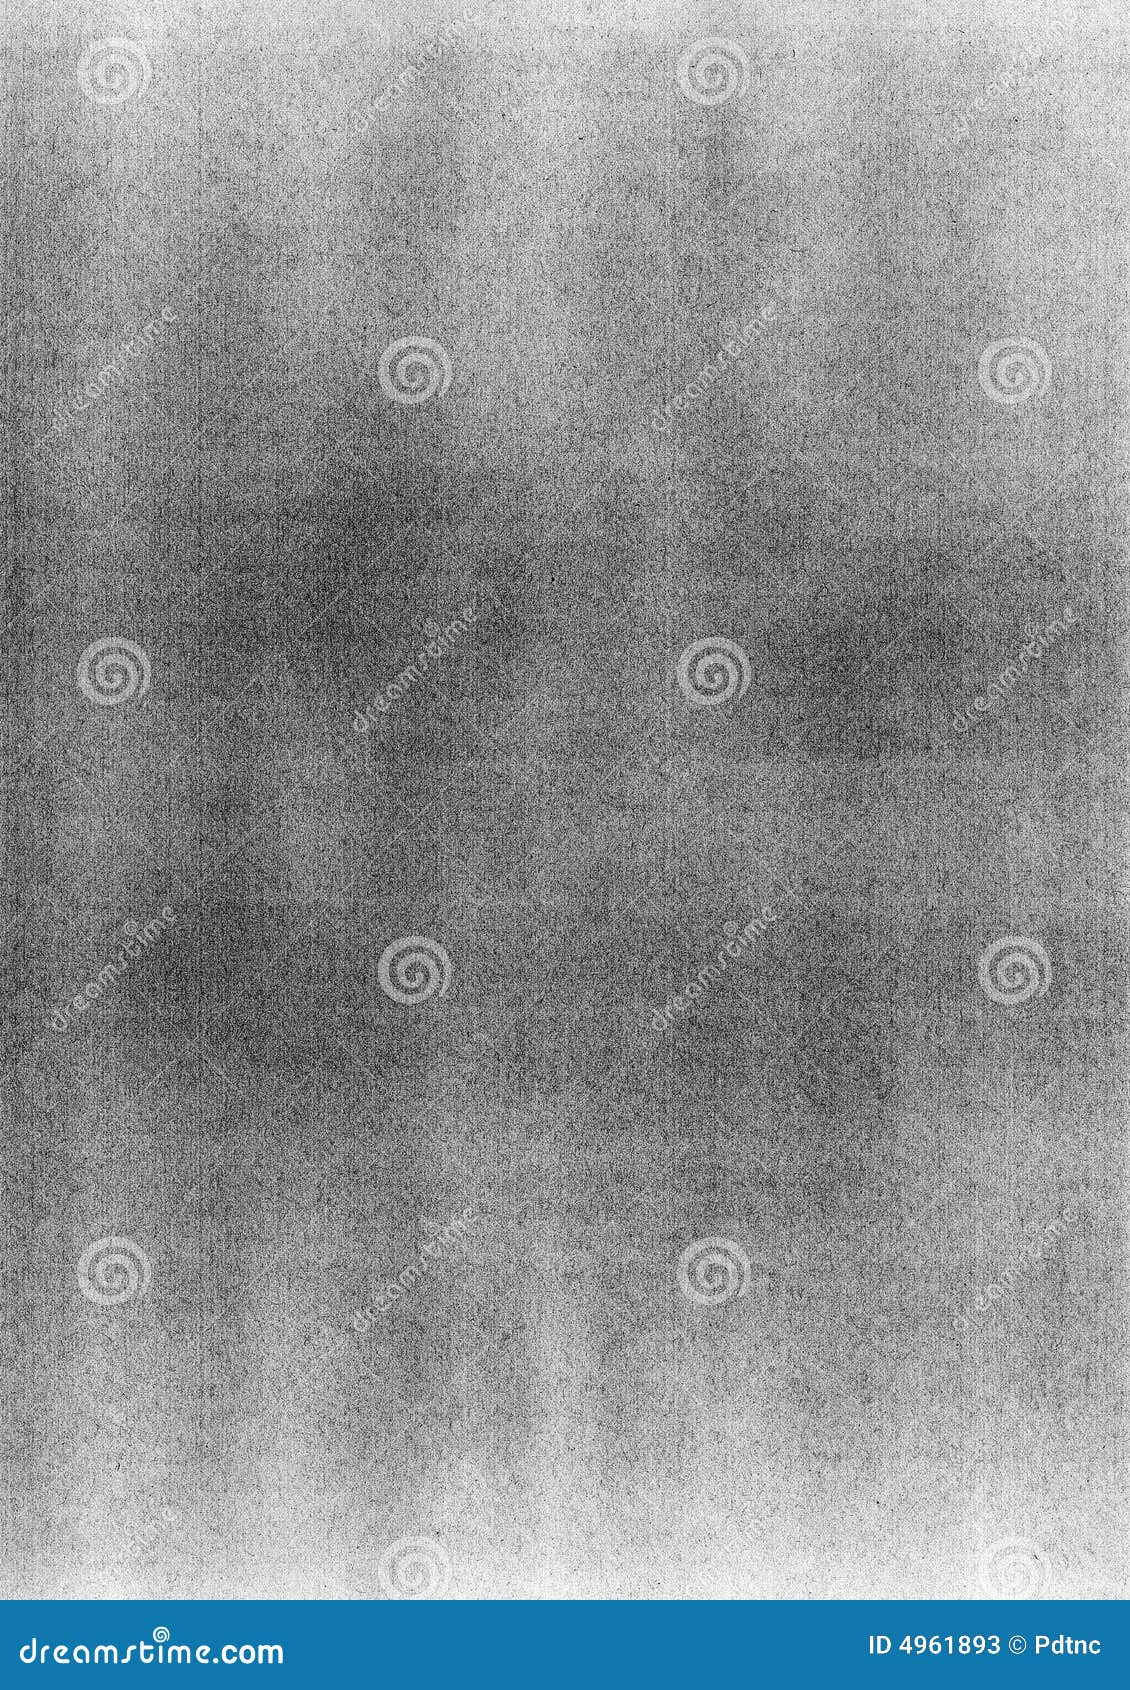 high resolution scan of a grunge photocopy